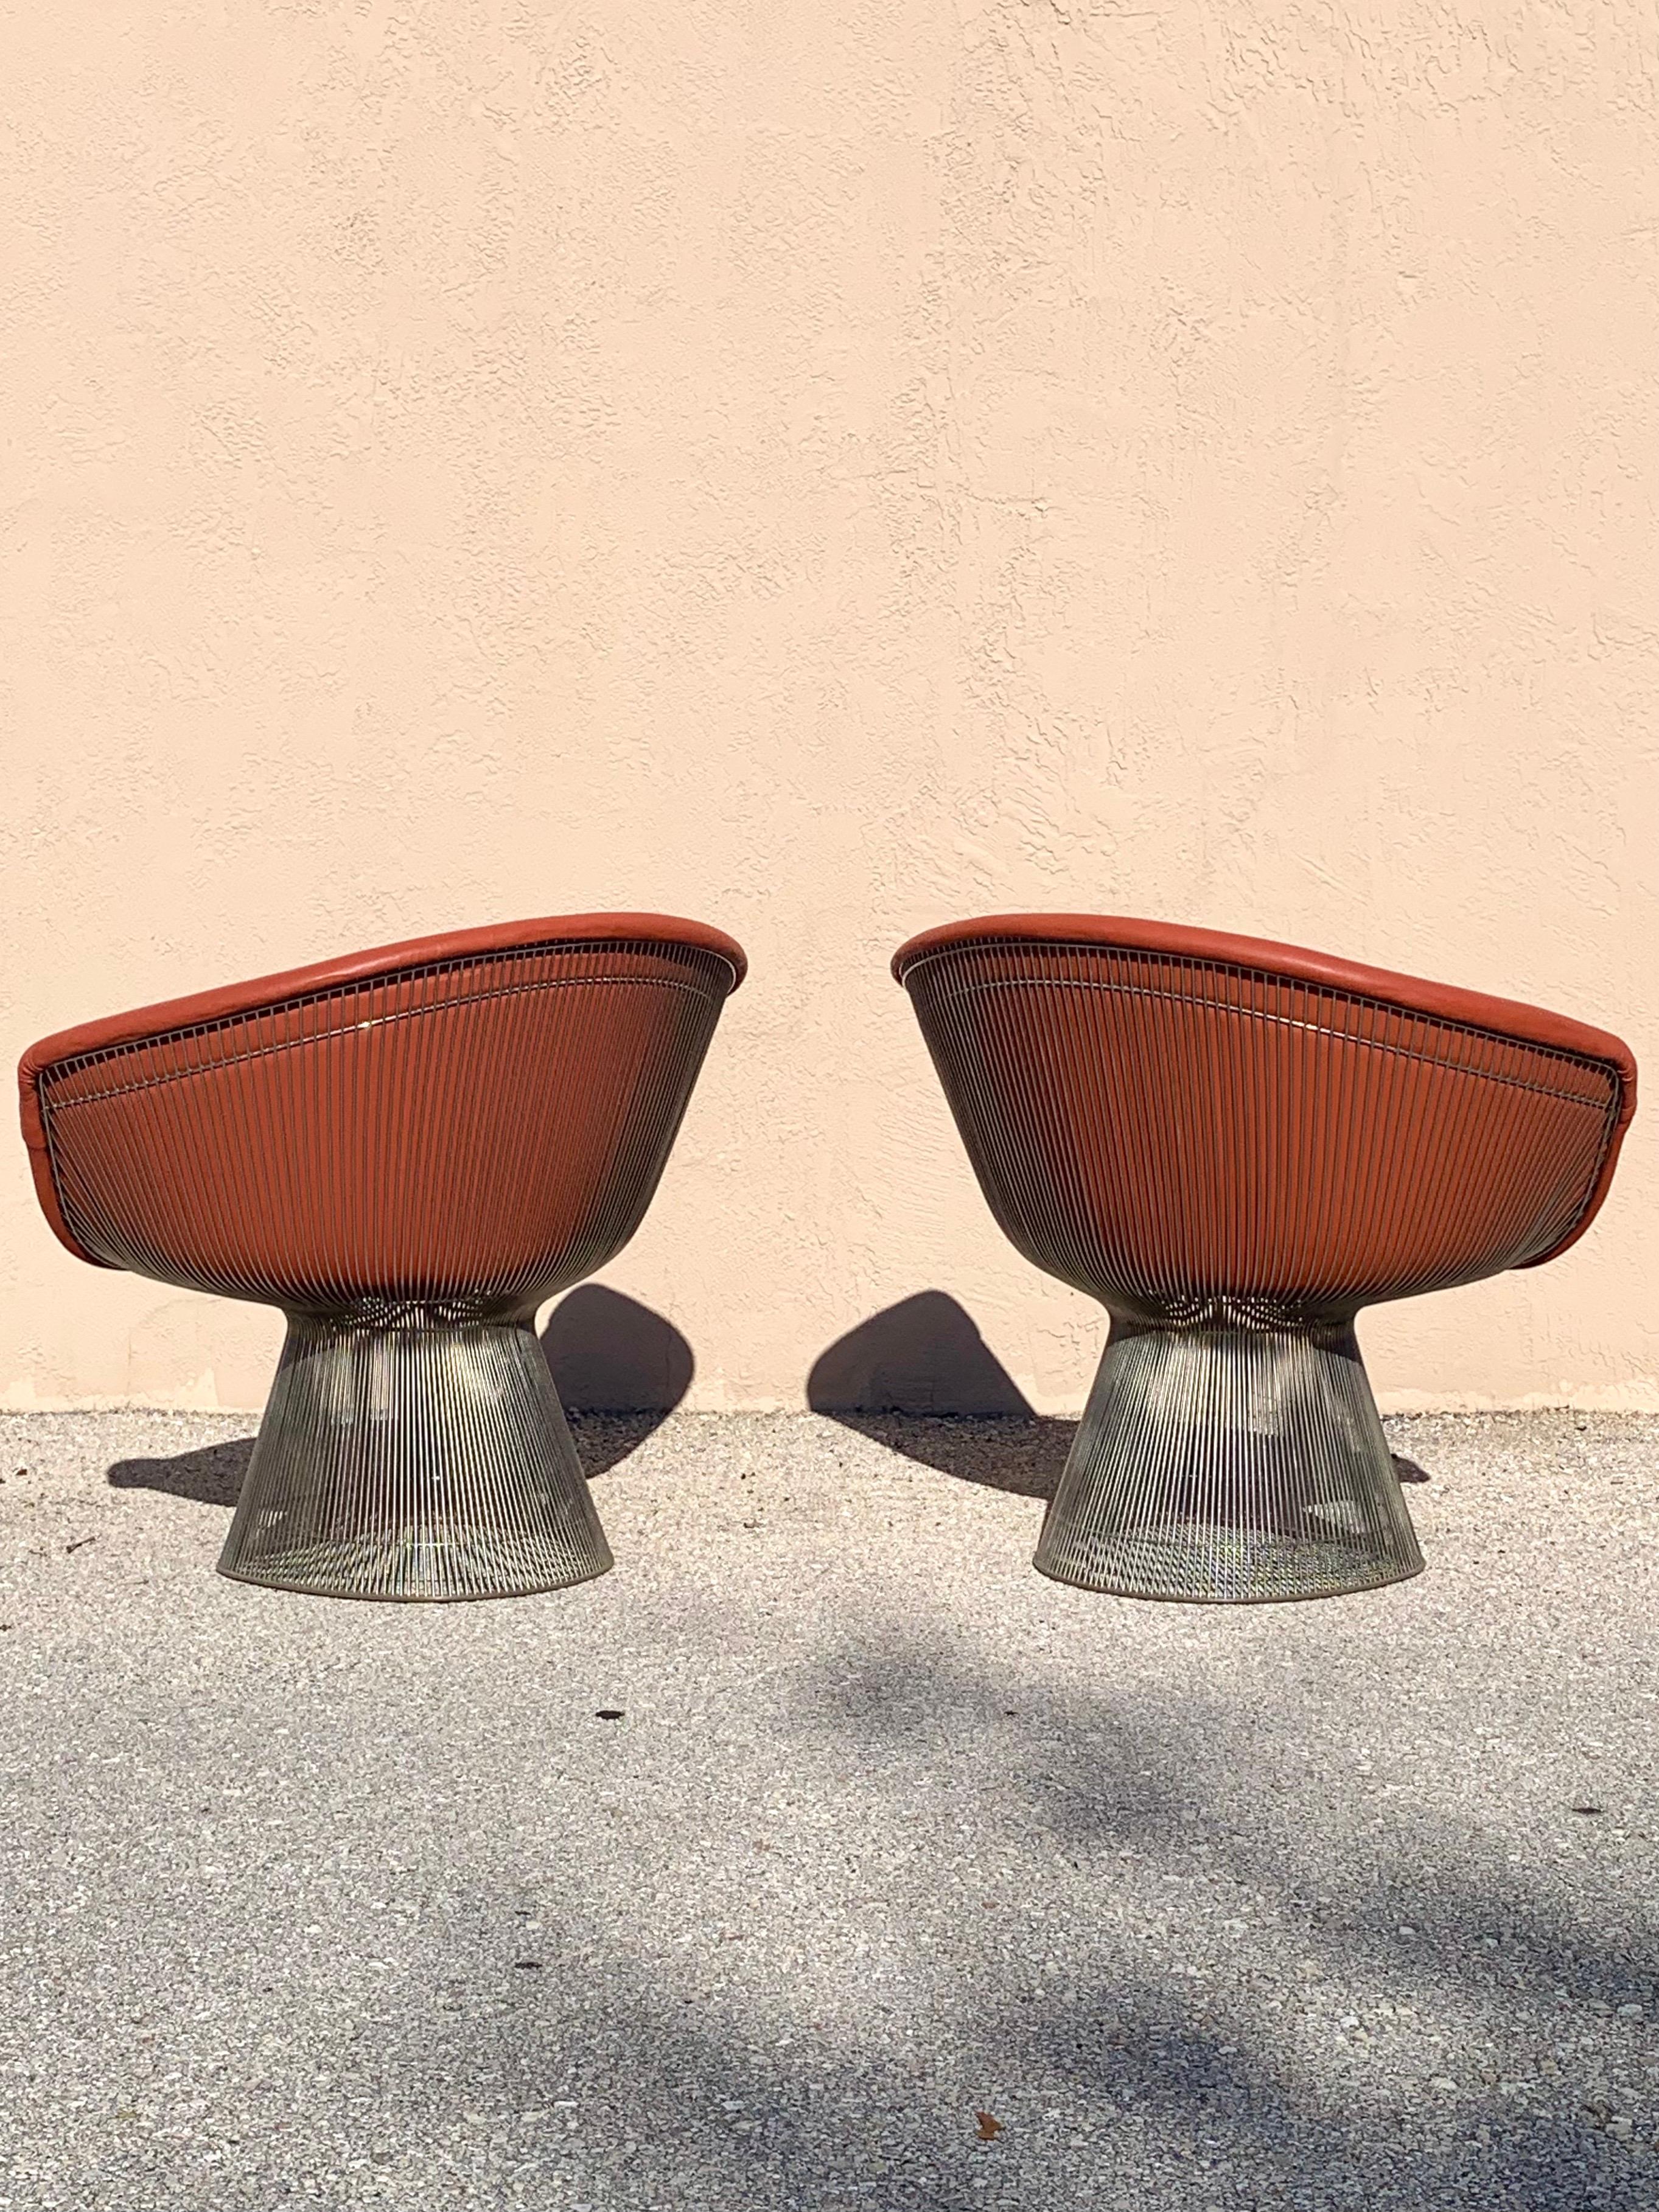 Mid-20th Century Warren Platner Chairs for Knoll, Nickel Frames, Orange Leather Upholstery, Pair